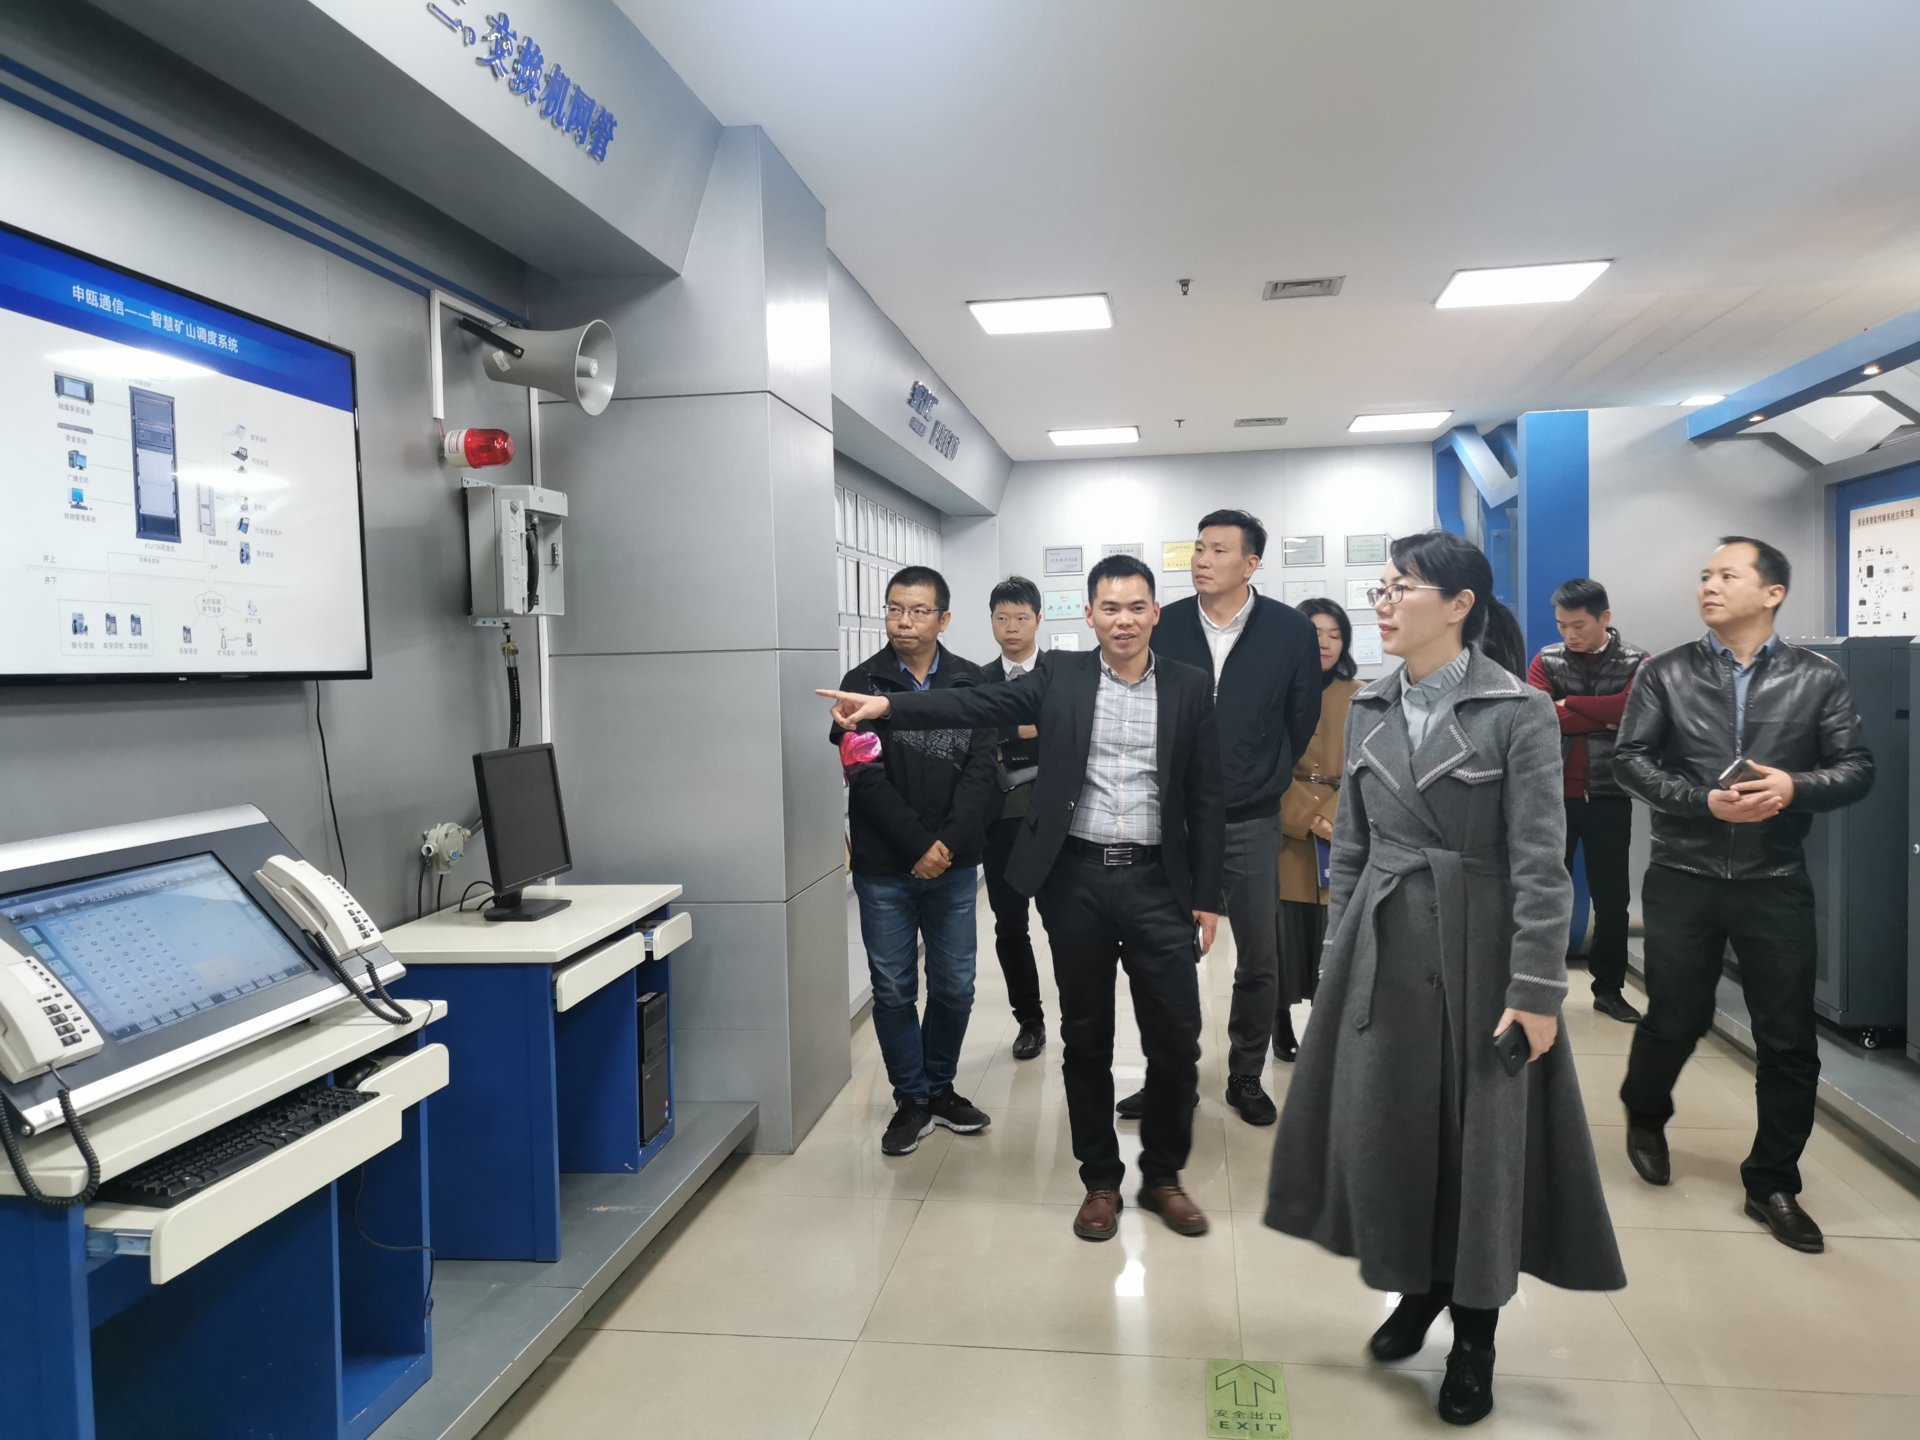 Zhang Wei, Member of the Standing Committee of the Lucheng District Committee and Deputy District Mayor, visited Shenou Communications to conduct research and guidance on the development of the digital economy industry